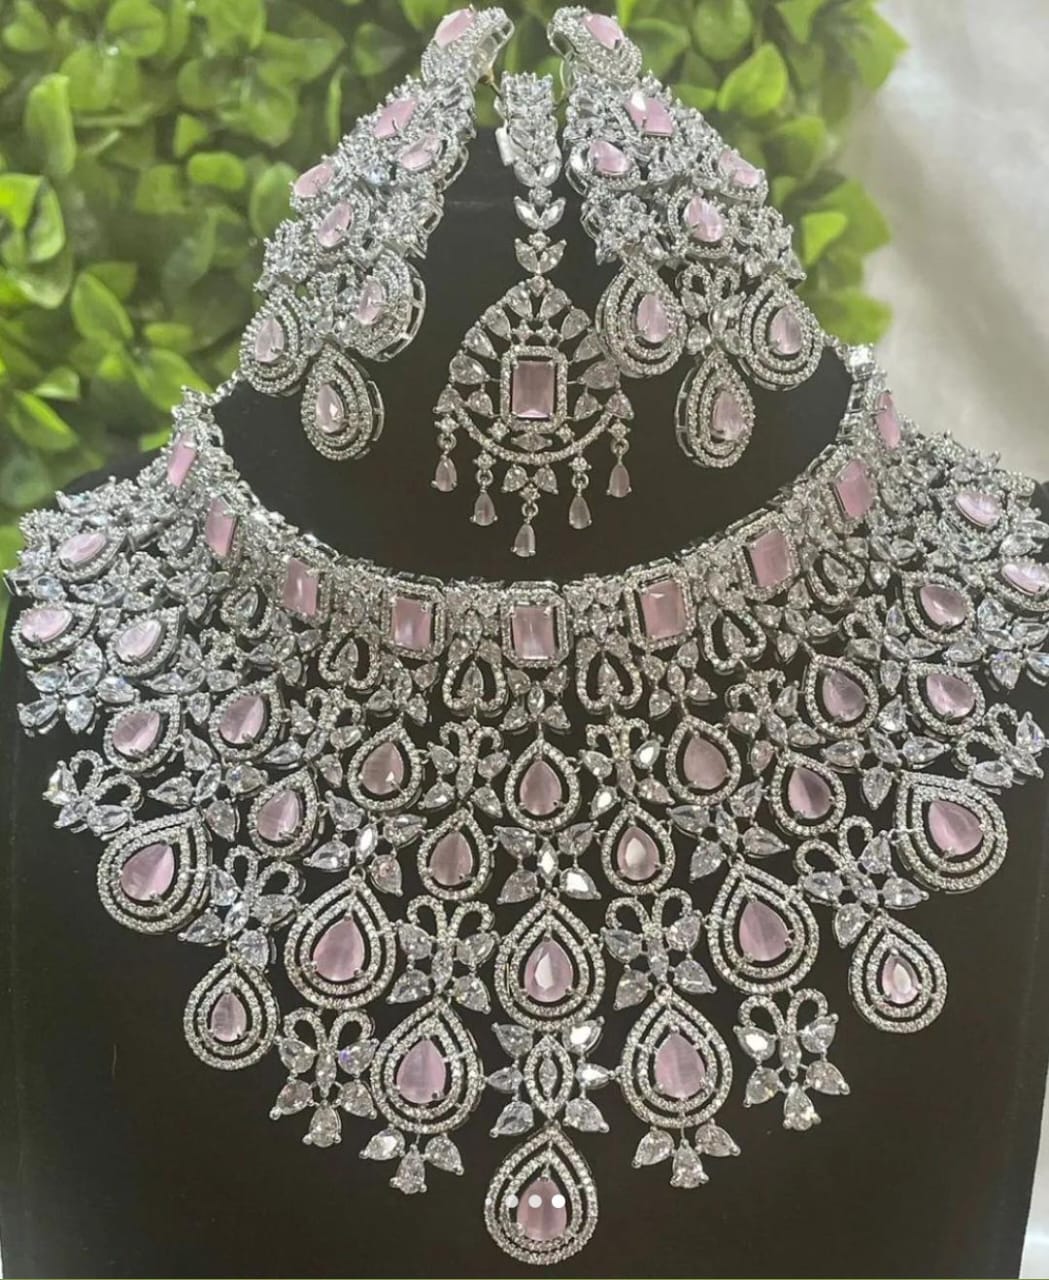 Unique CZ Stone Bridal Choker Necklace with Earrings and Tikka -Silver and RoseGold polish